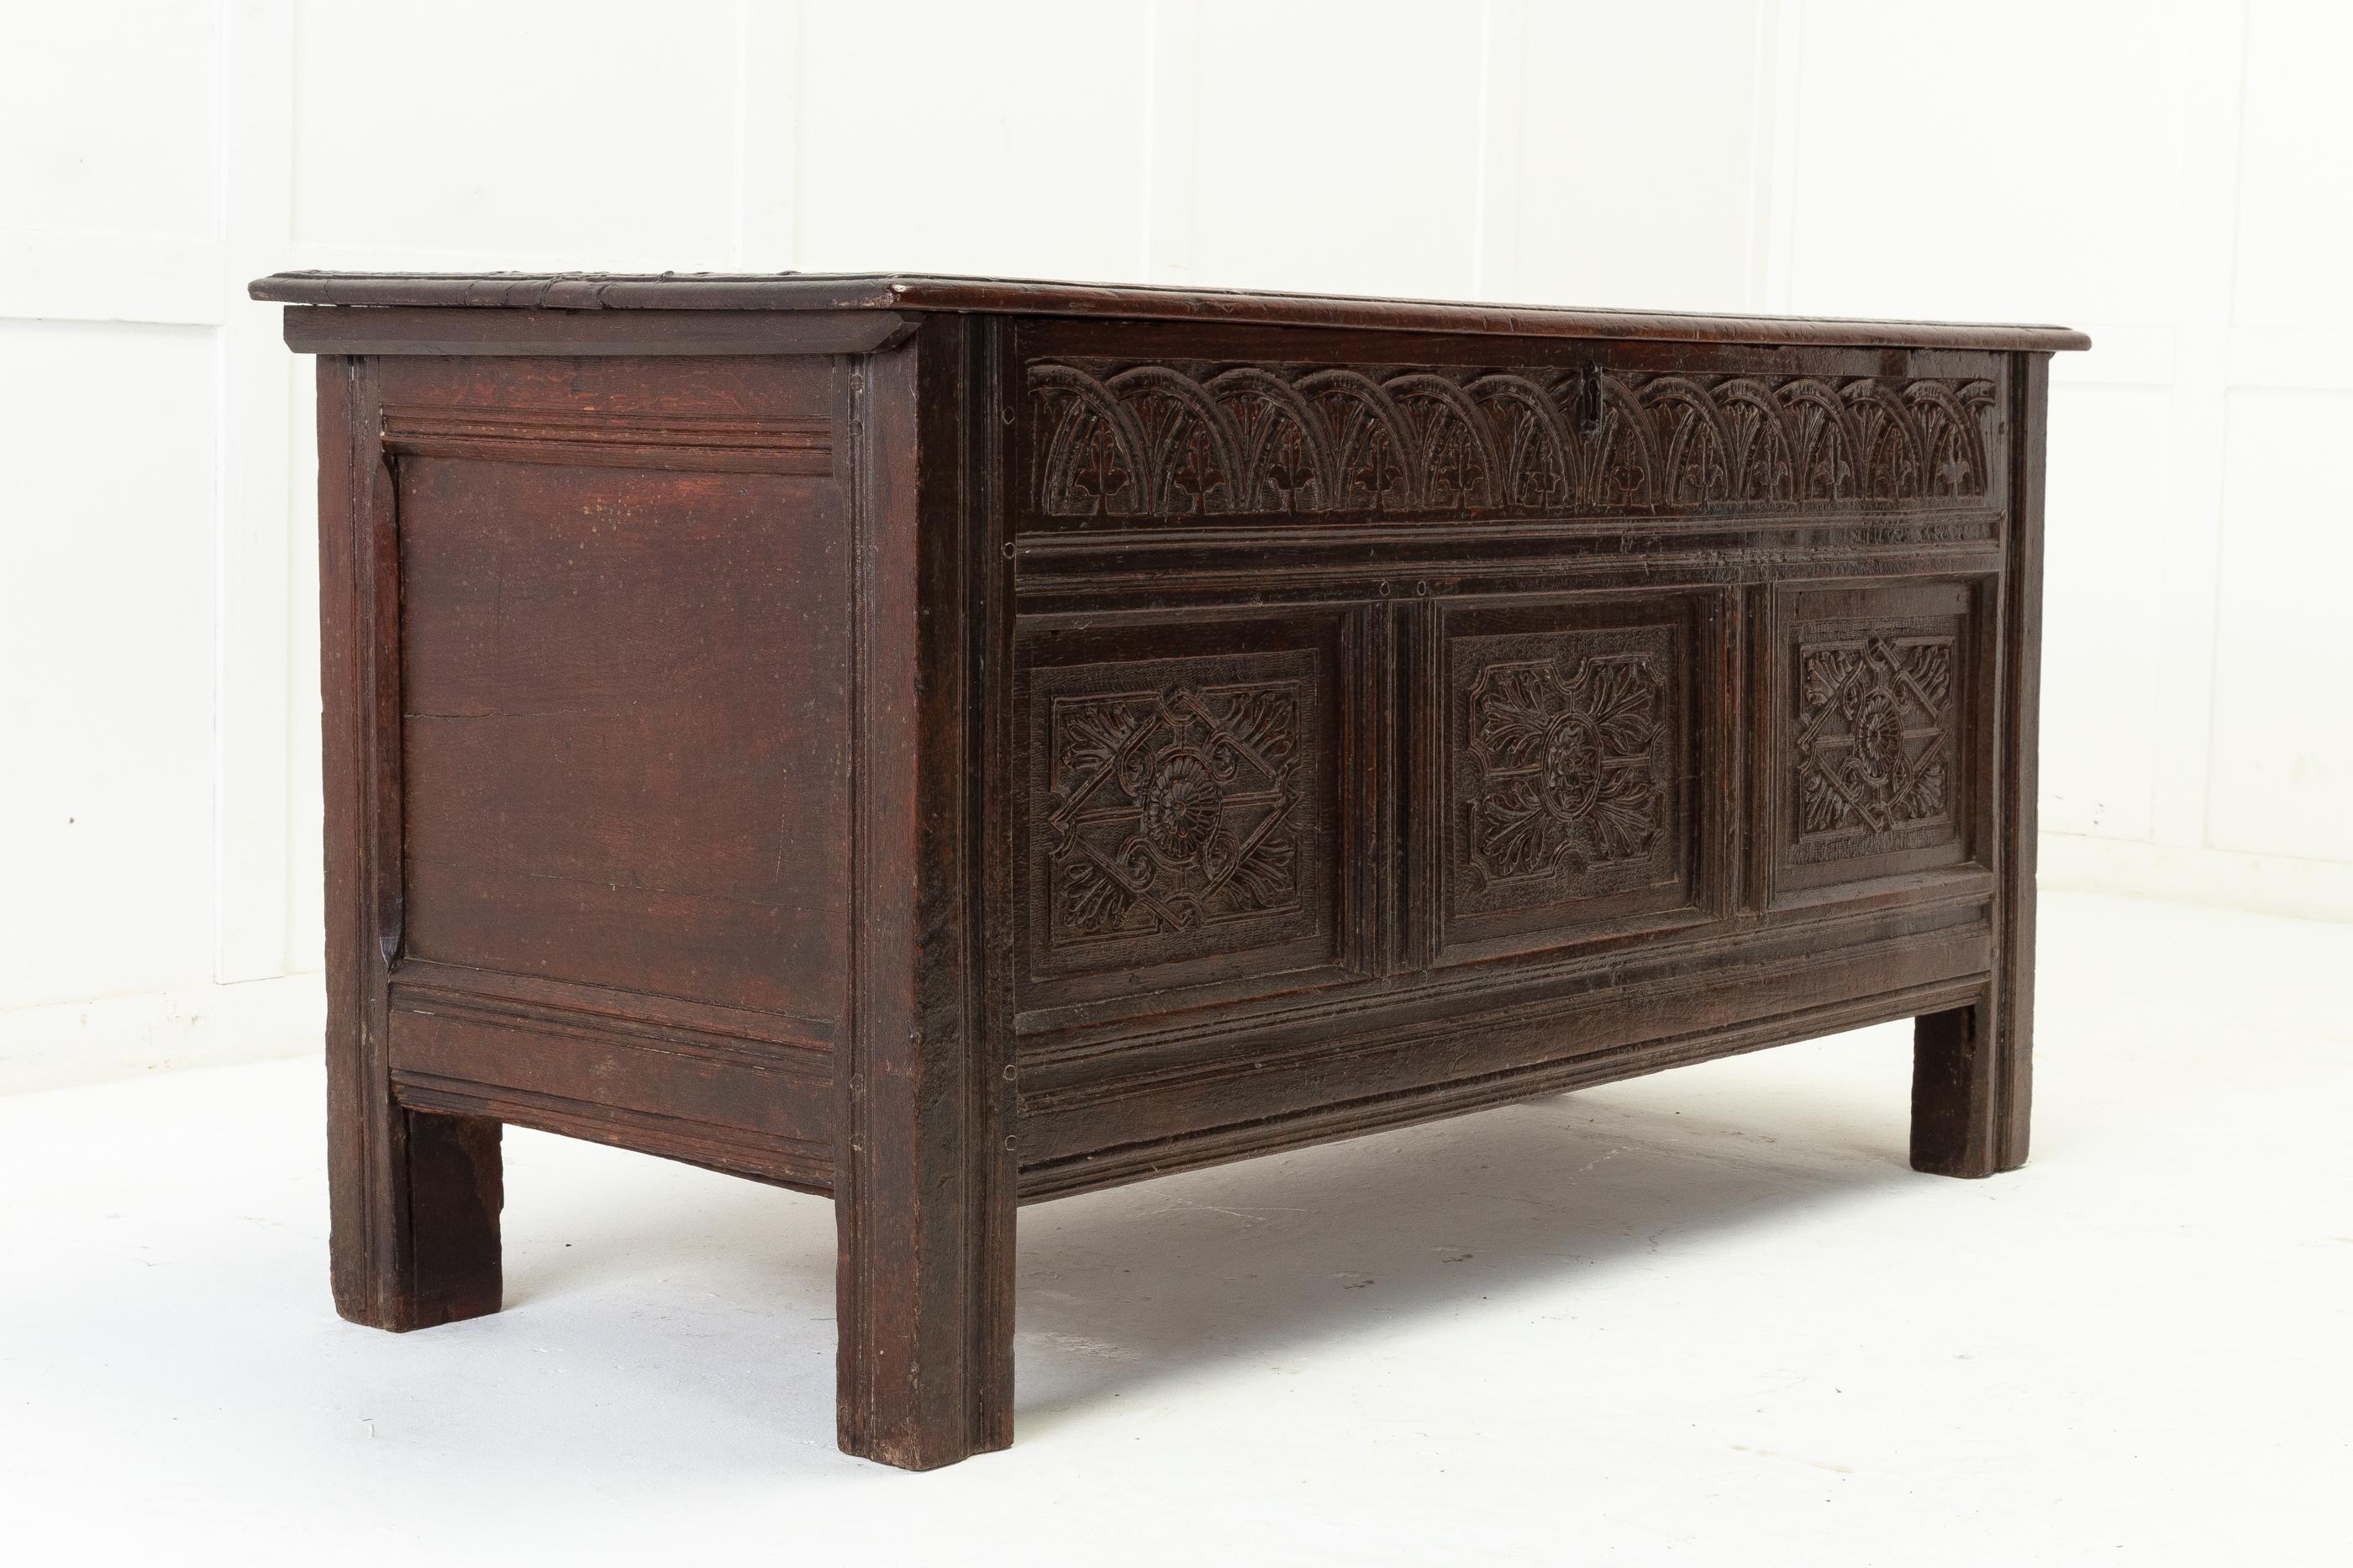 17th century English oak panelled coffer. Having a two plank top with iron hinges. Inside has a small boxed compartment. The frieze and front panels are generously carved with detailing such as rosettes, foliage and acorn leaves. Panelled sides and